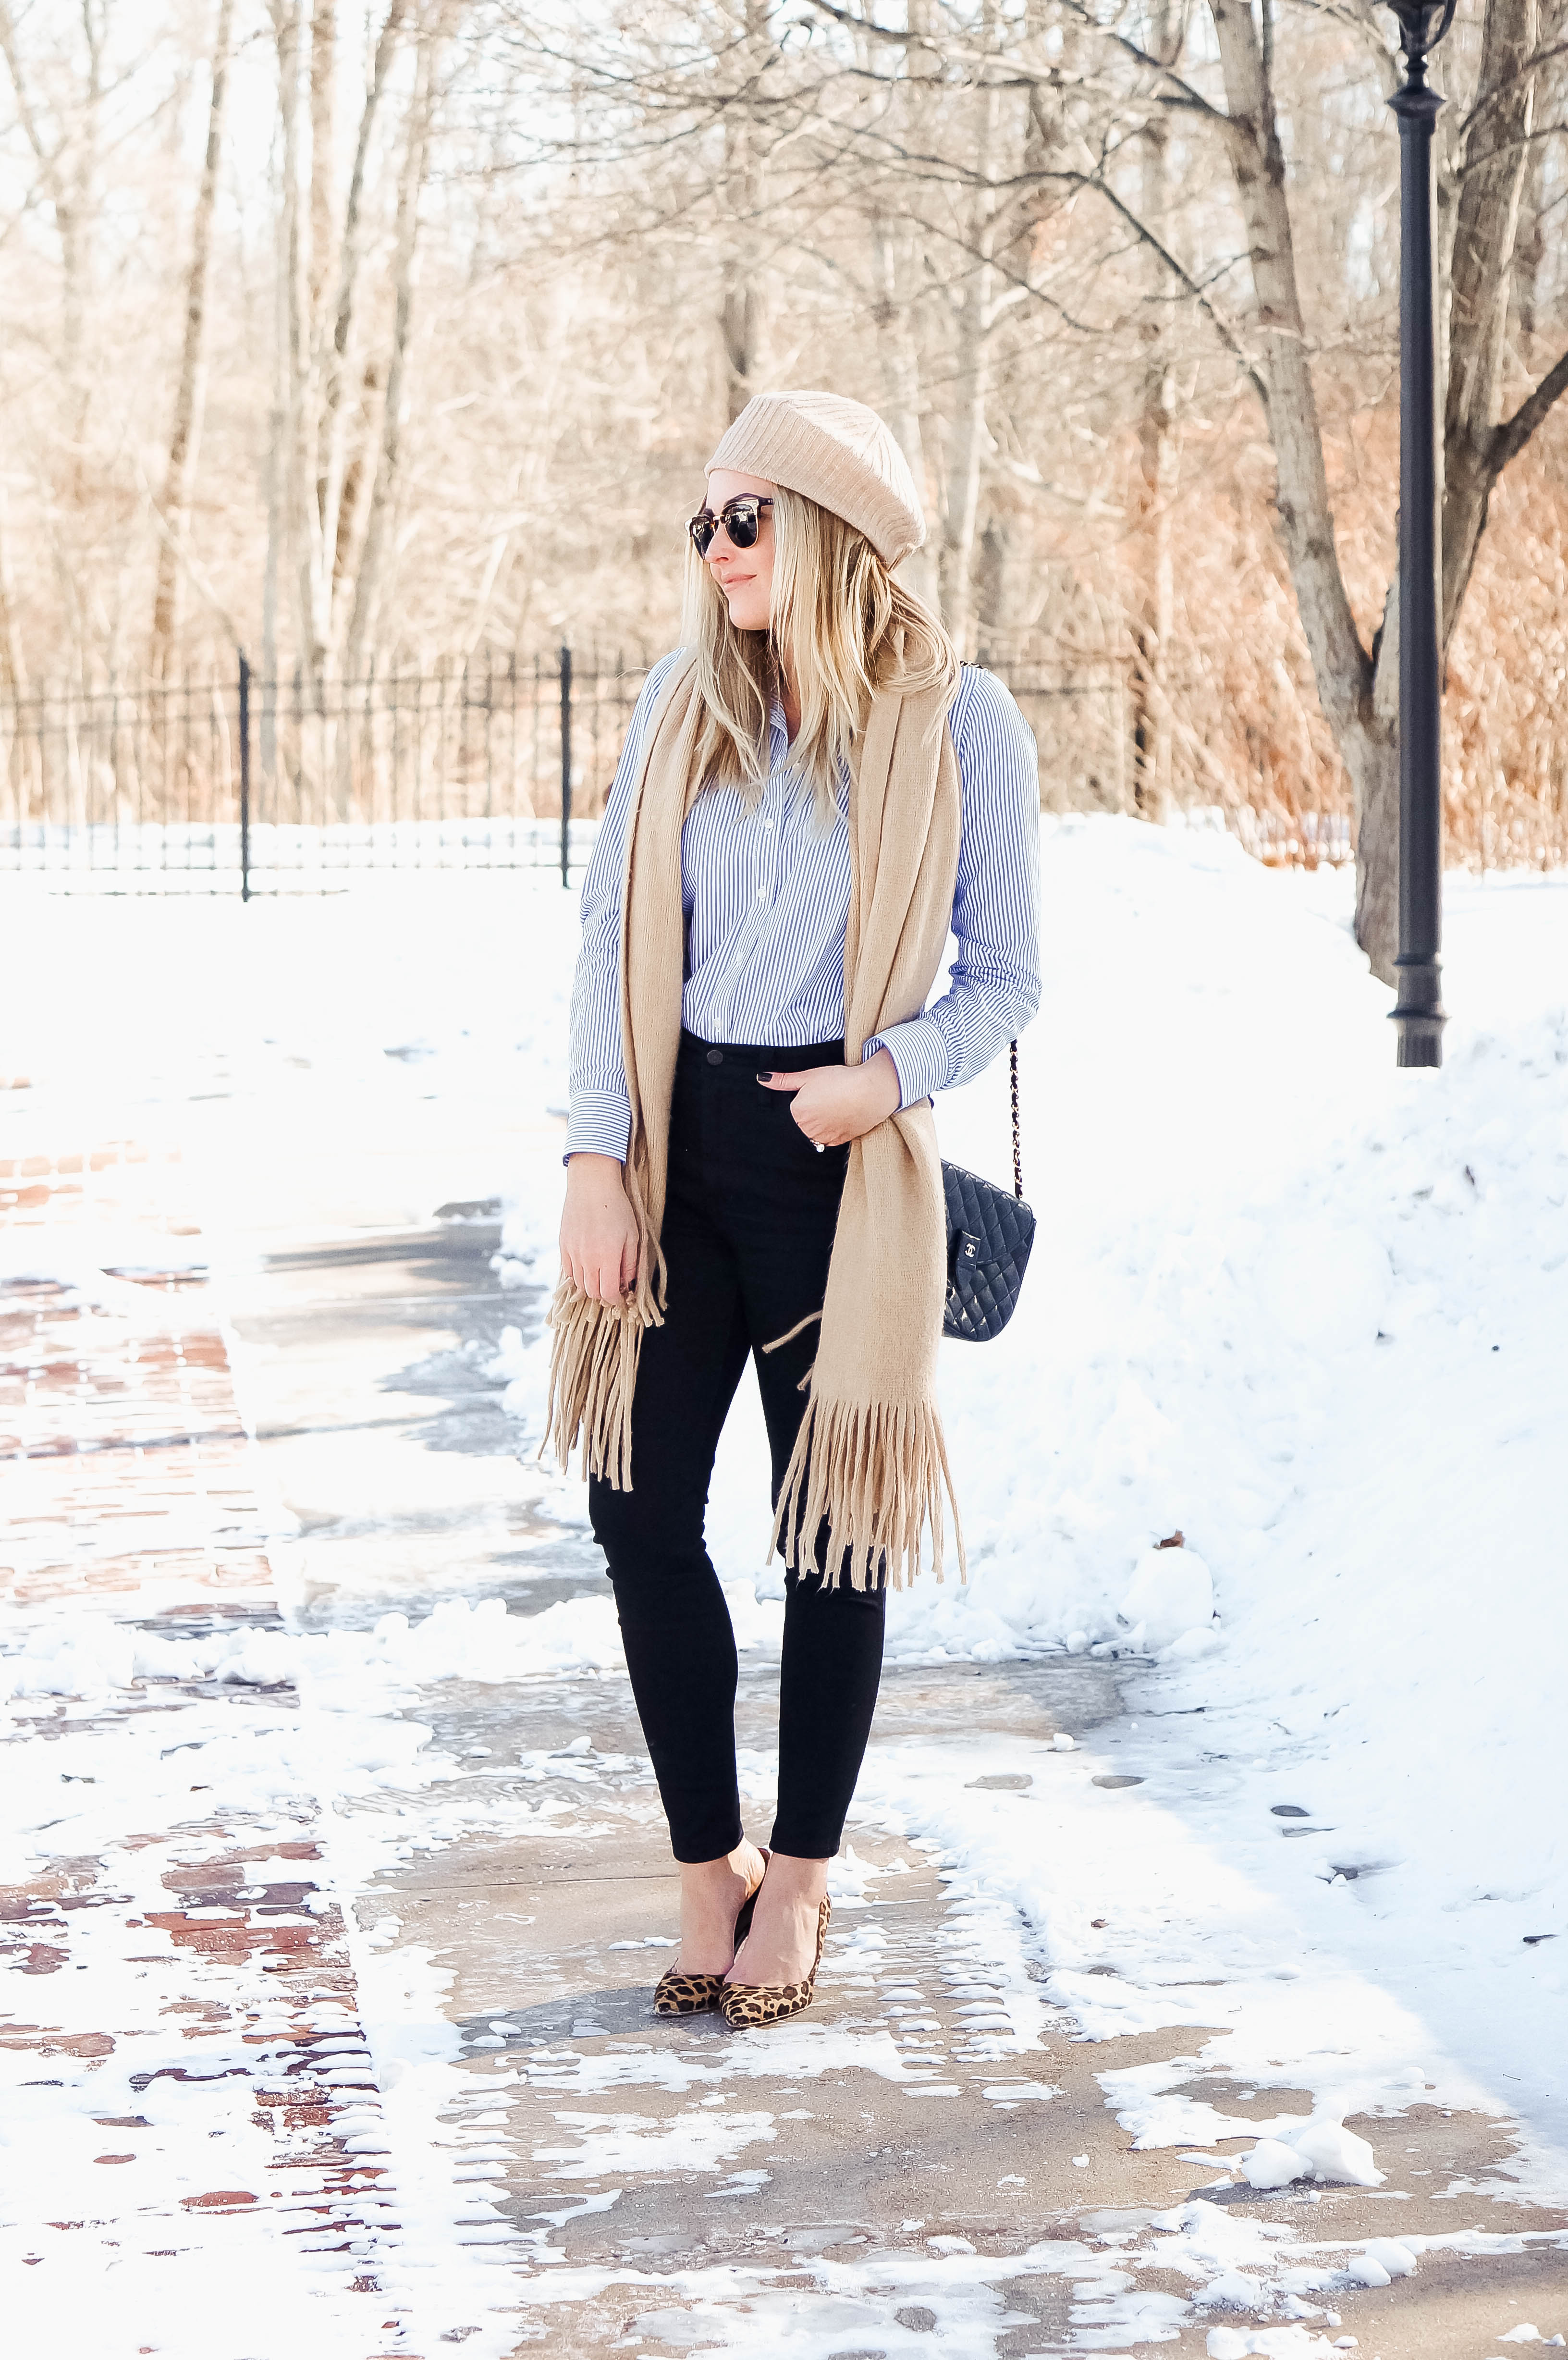 Styling Blue & White Stripes For Winter